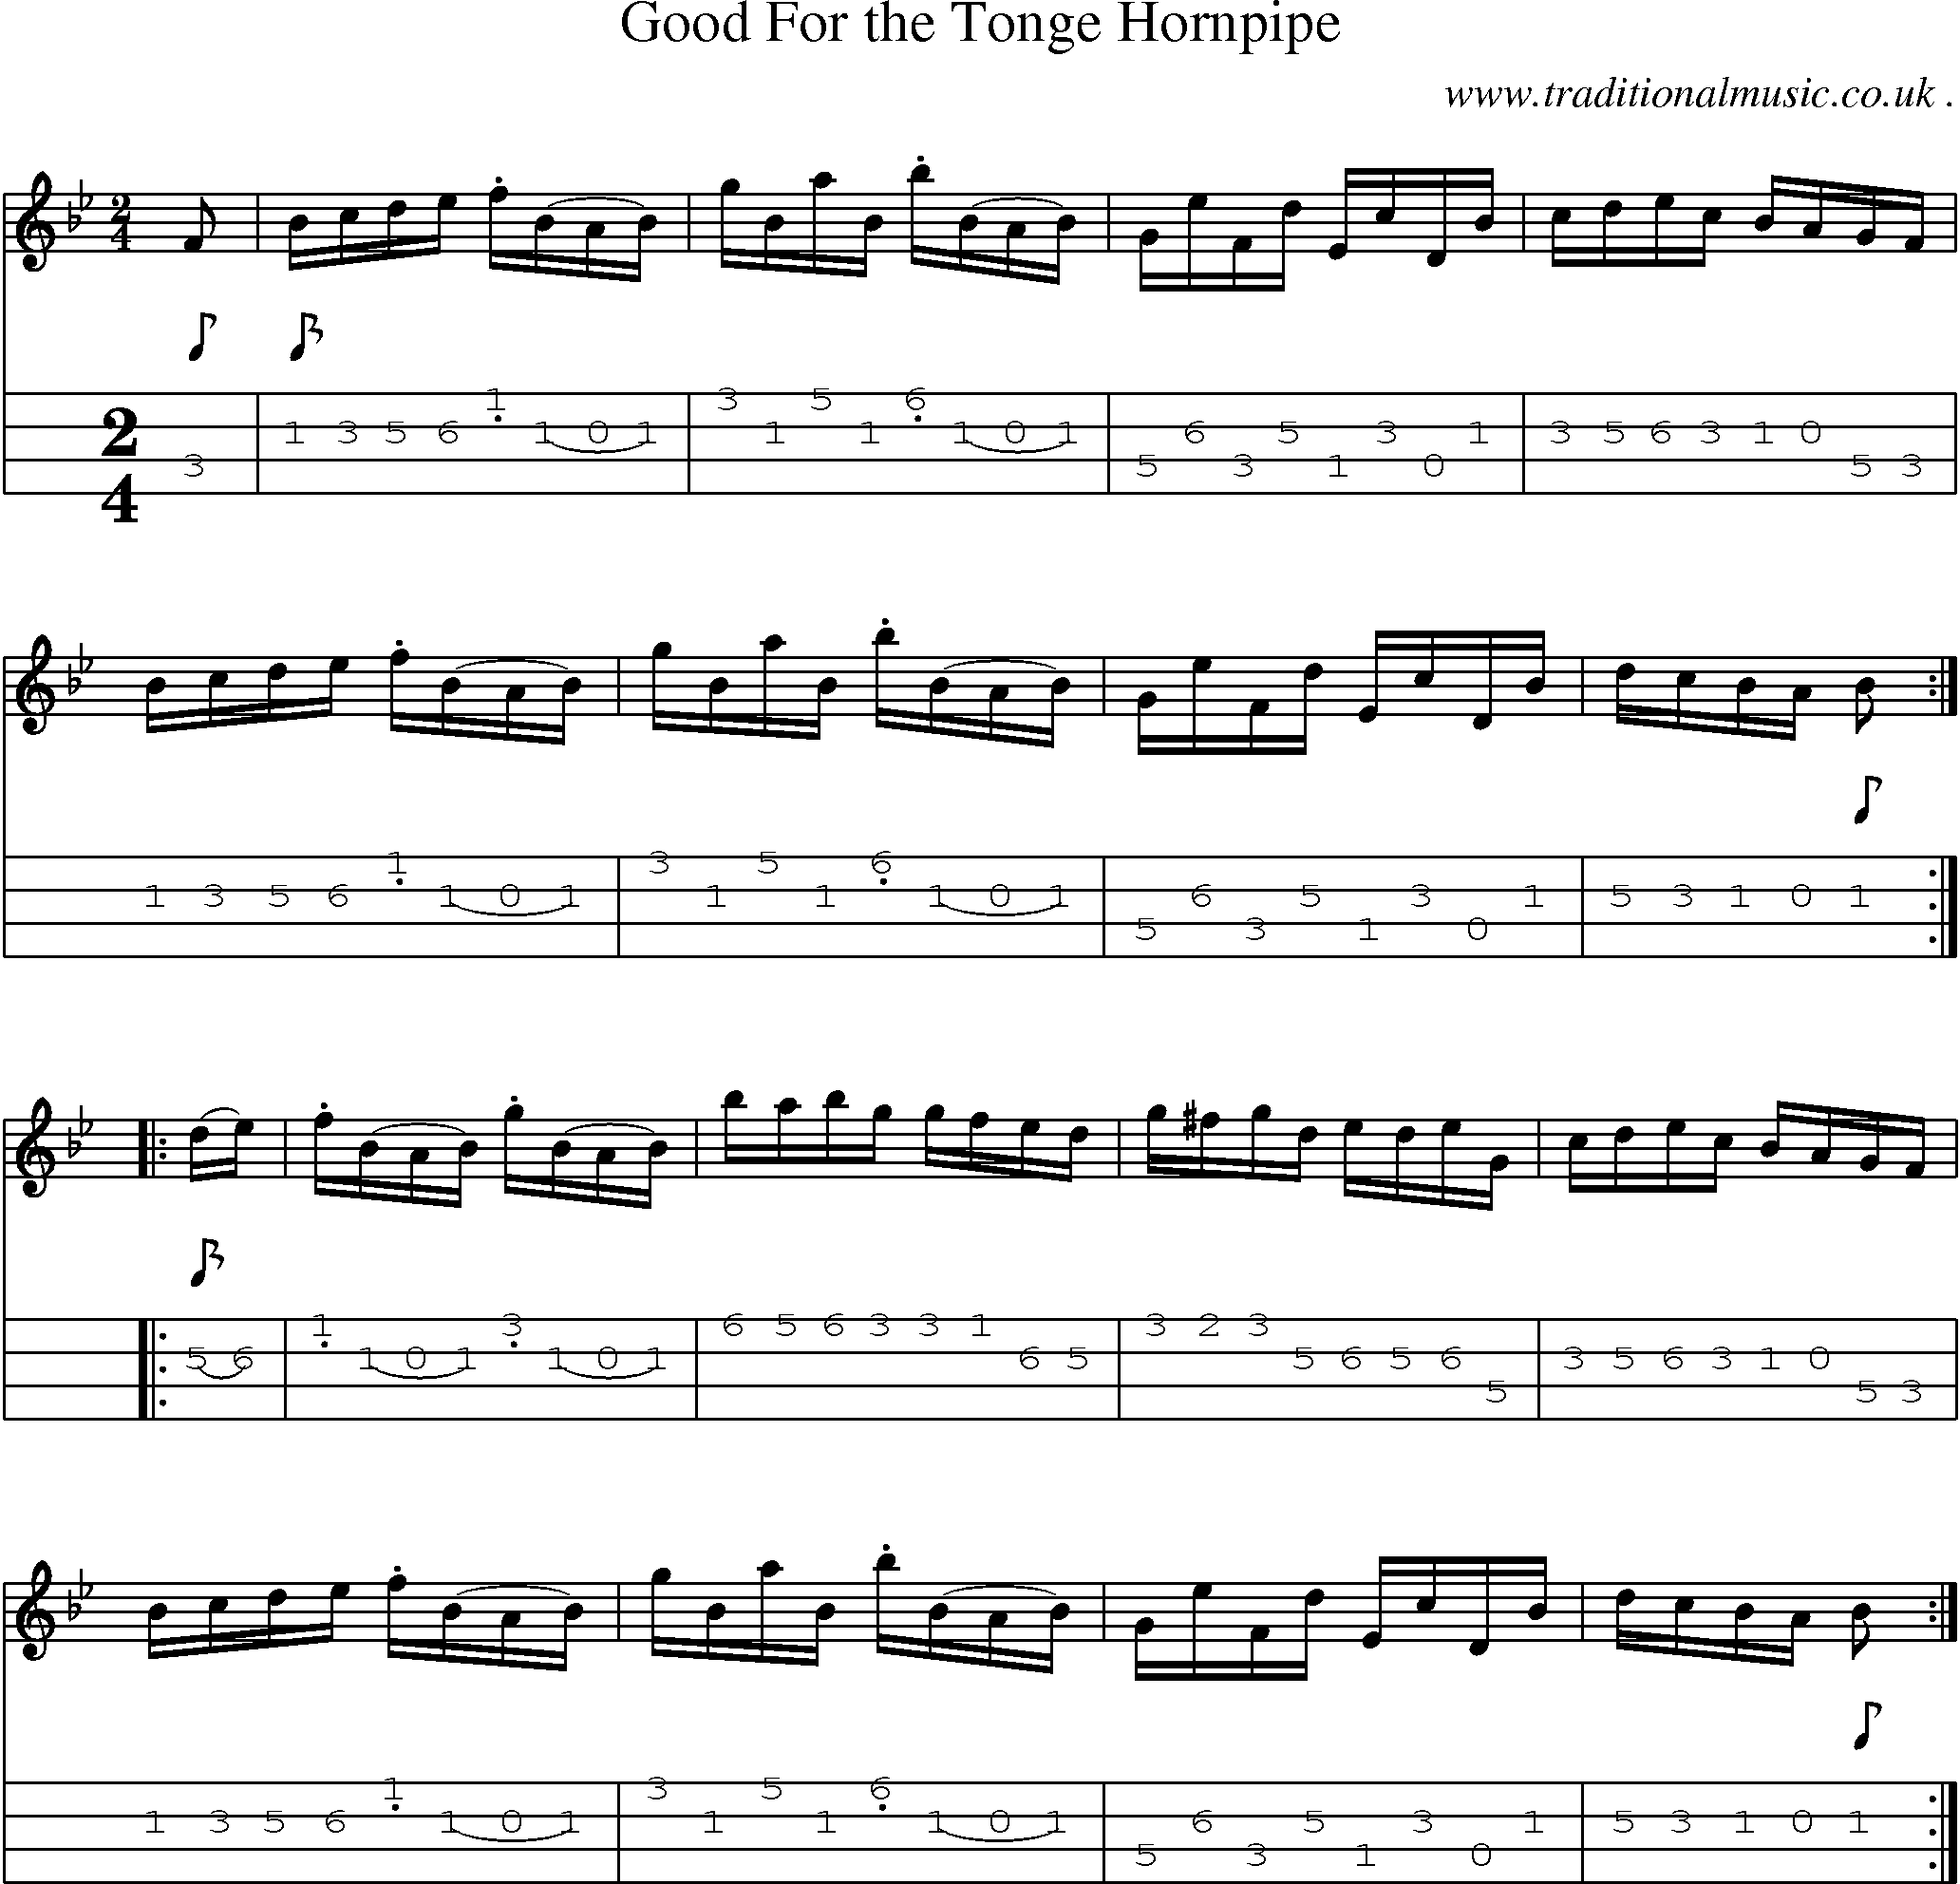 Sheet-Music and Mandolin Tabs for Good For The Tonge Hornpipe